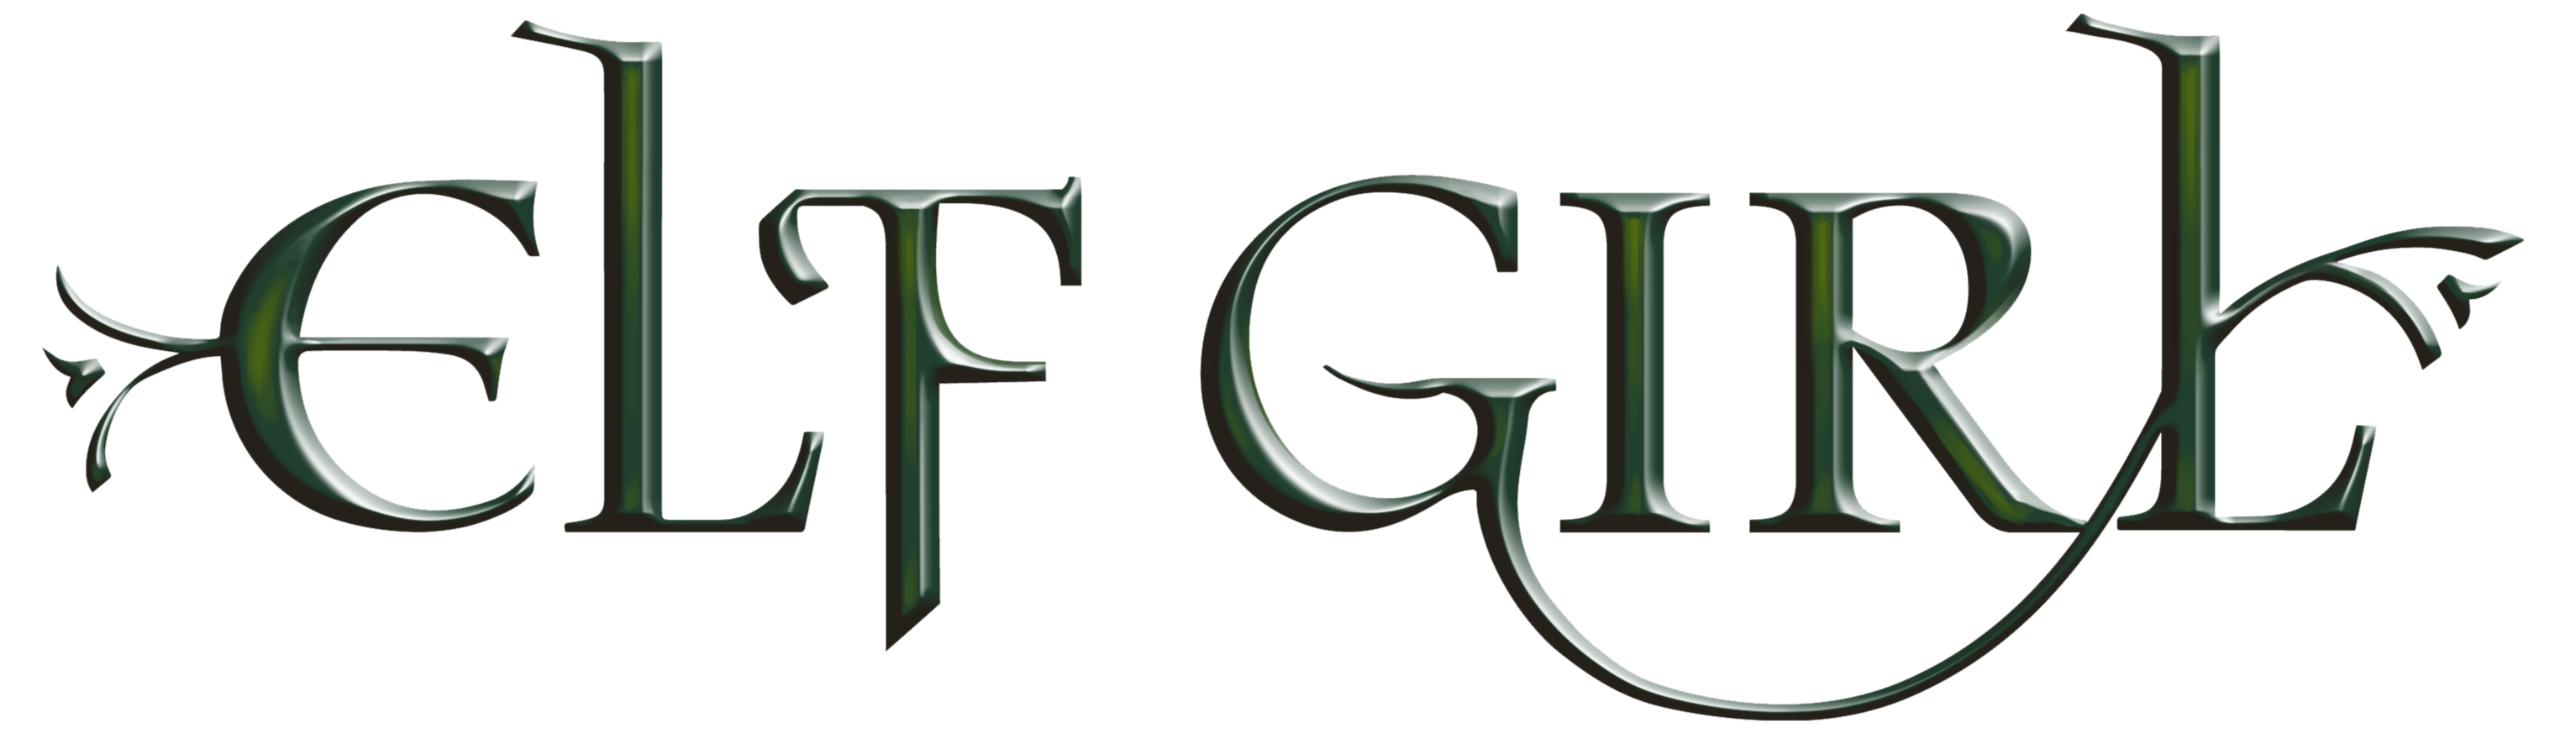 An image of the title 'Elf Girl' in stylized green font.